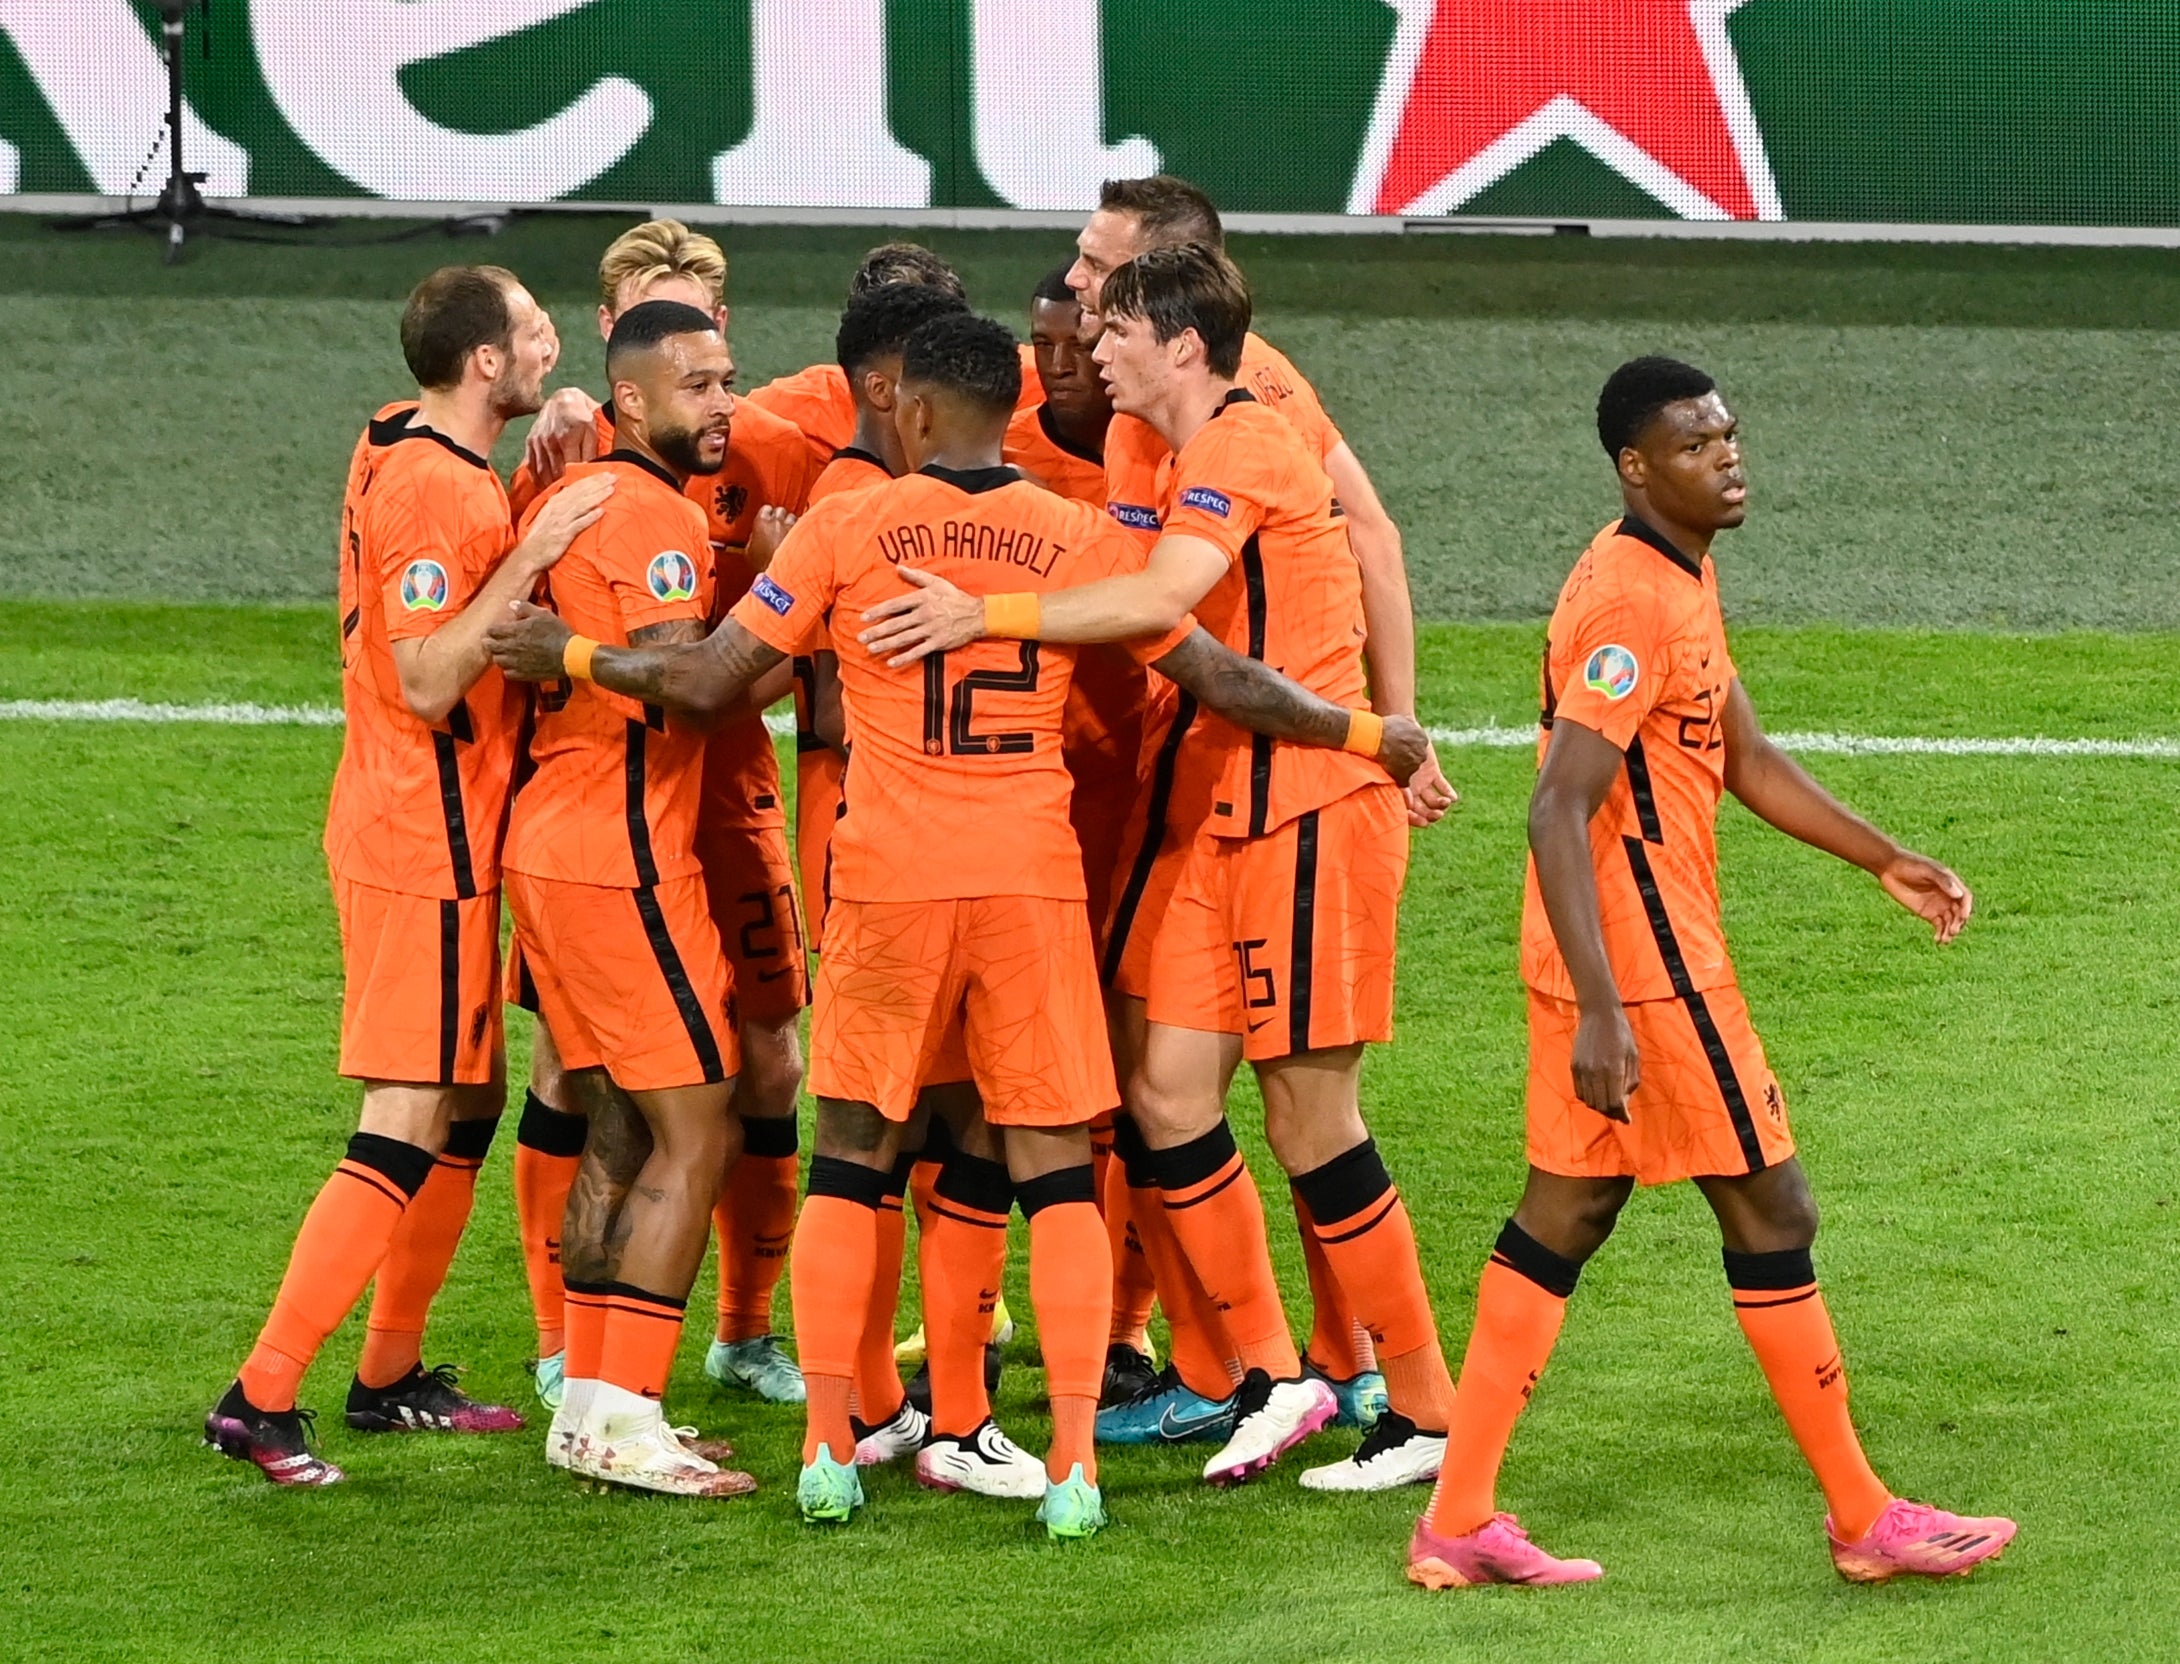 Holland's players celebrate after scoring a second goal against Ukraine